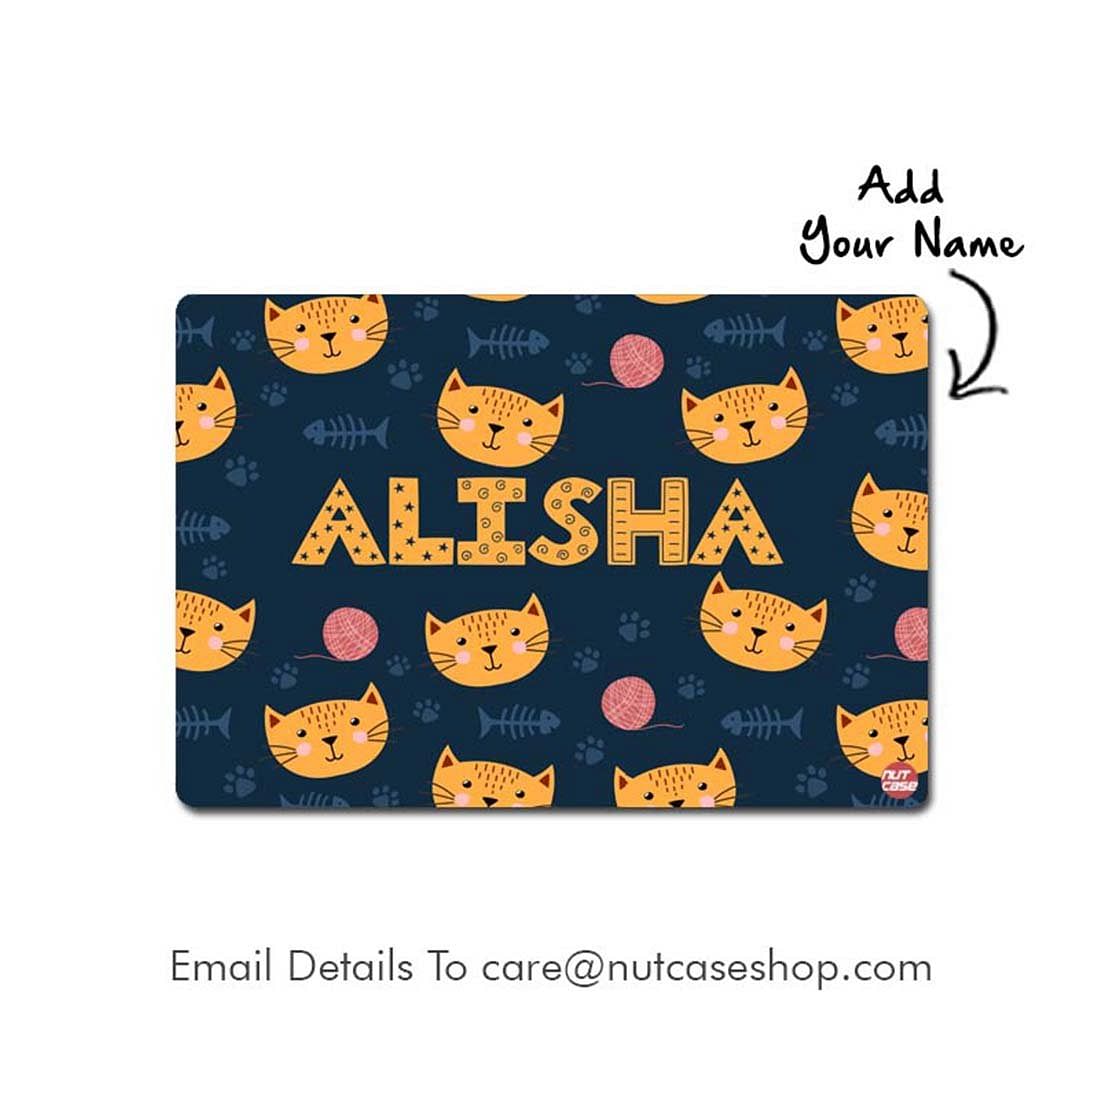 Custom Made Printed Placemats for Kids Return Gift  - A Cute Little Cat Nutcase